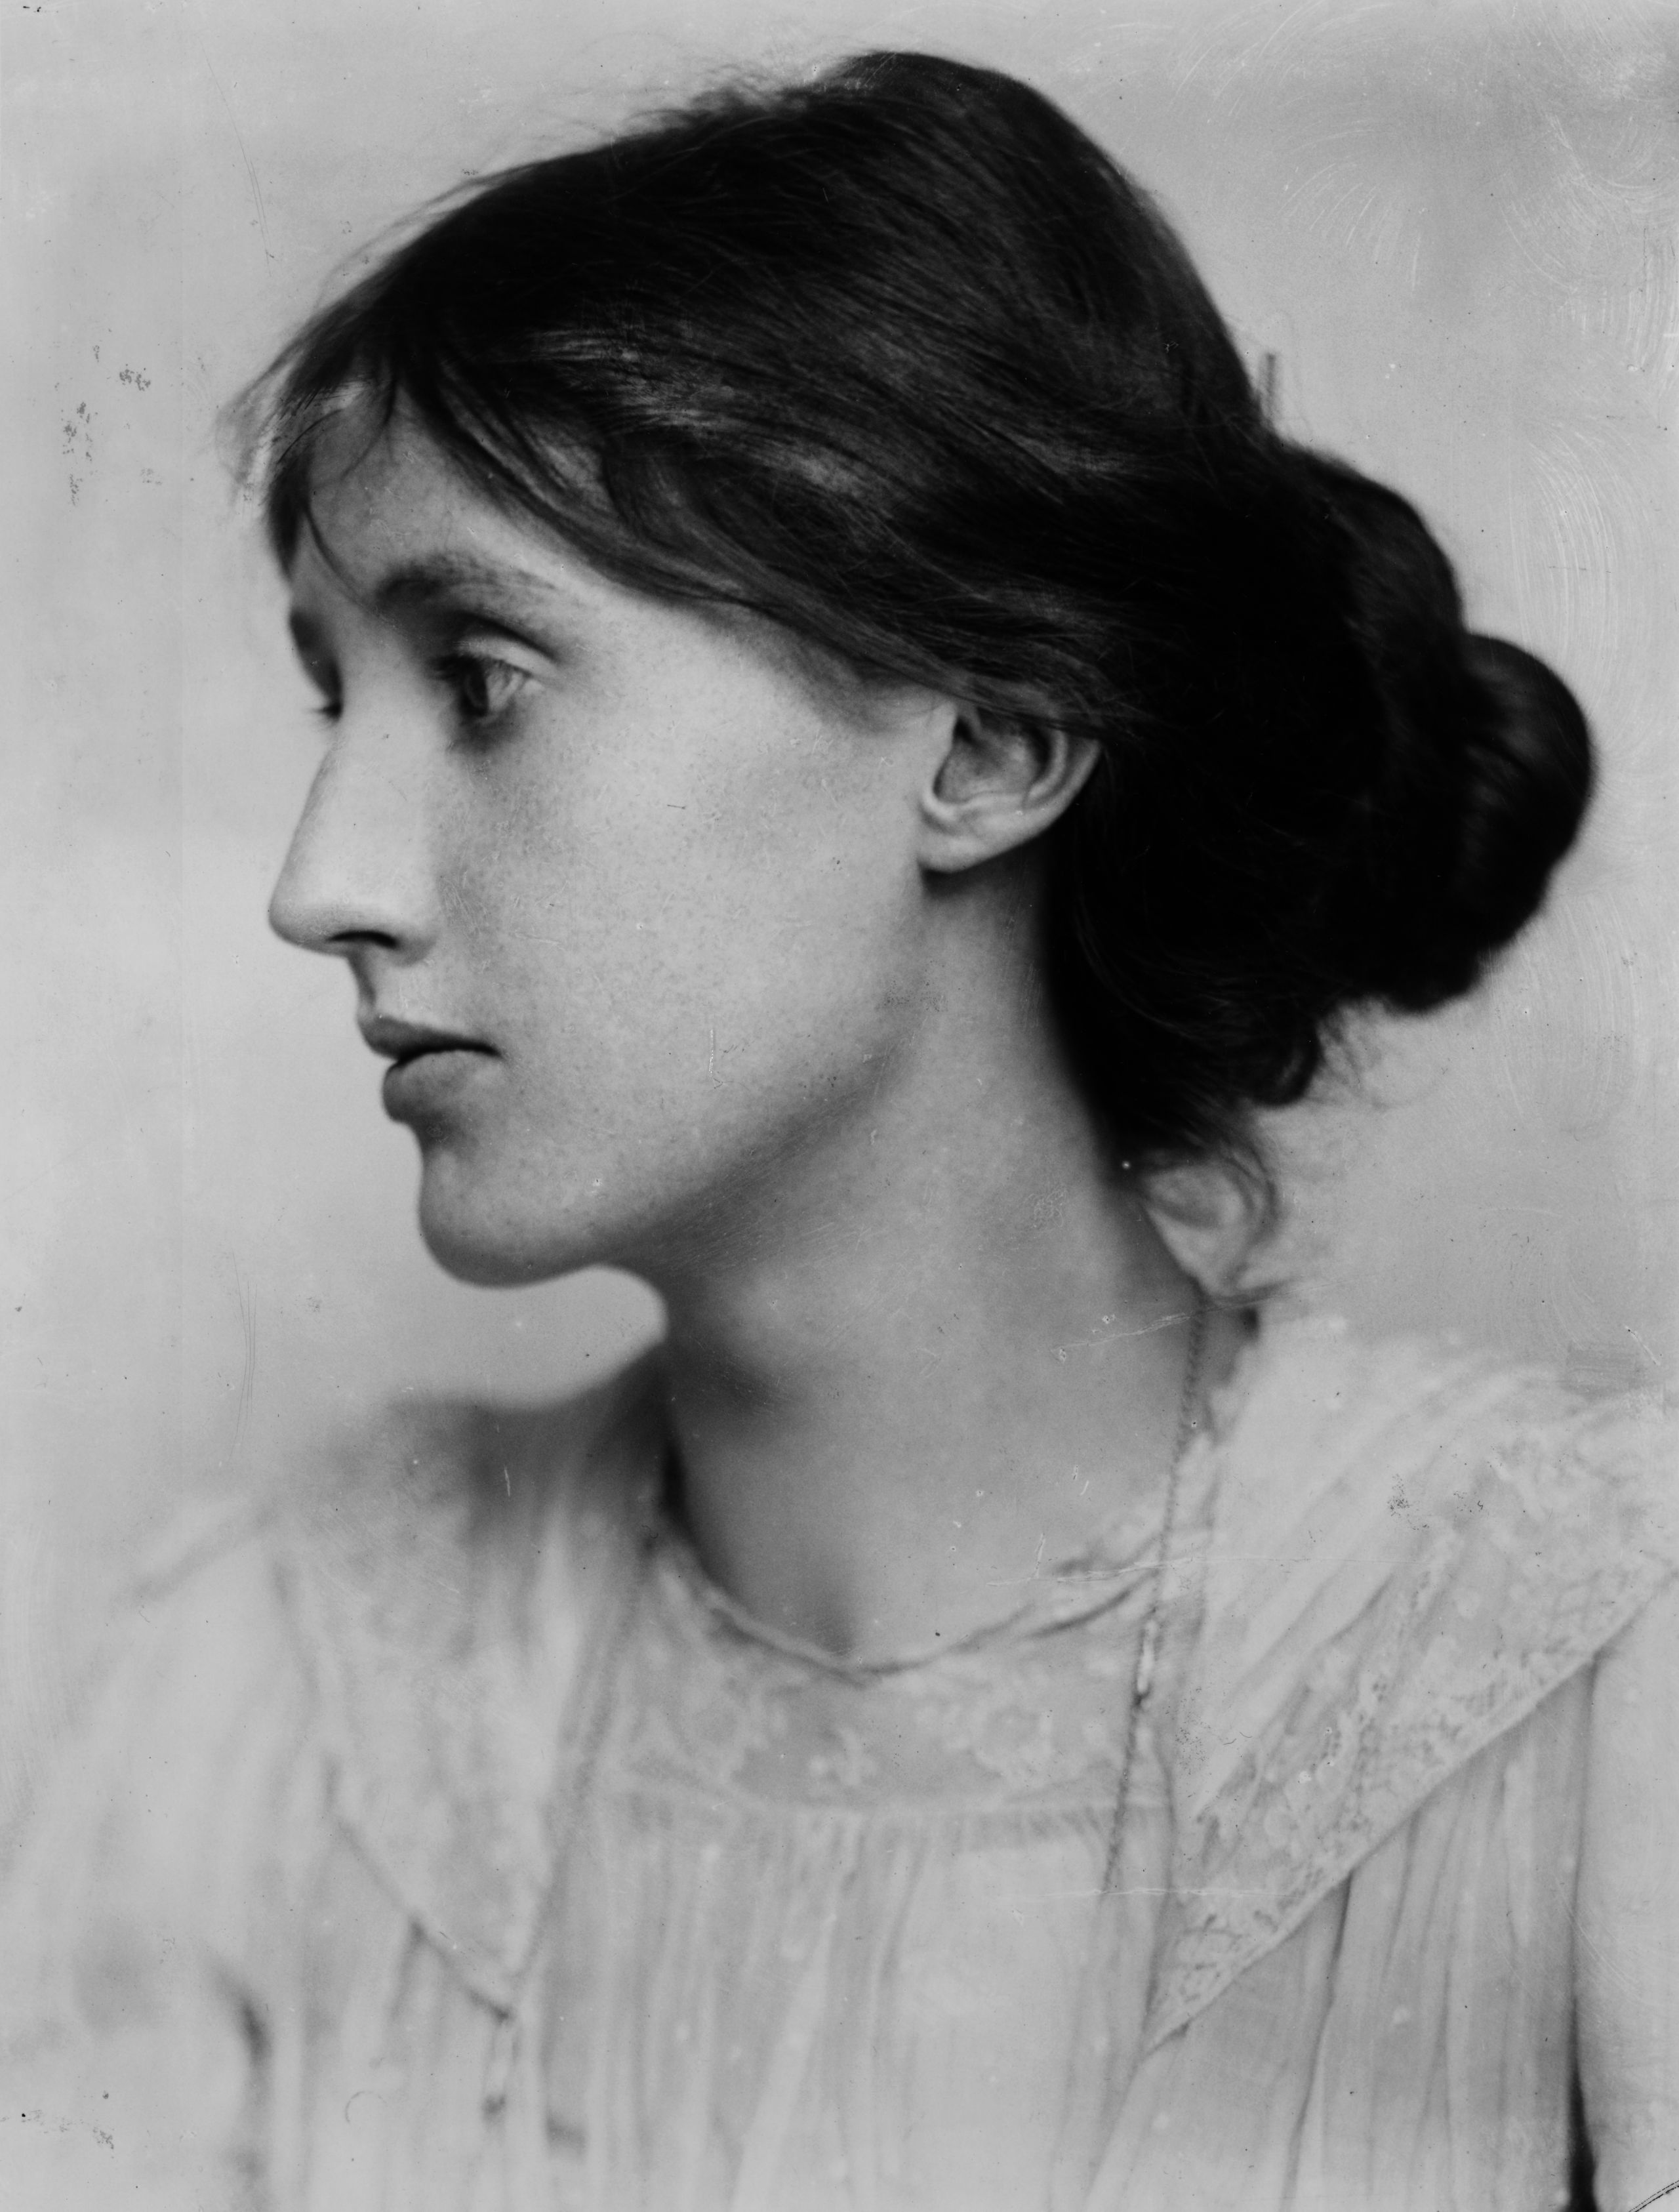 English novelist and critic Virginia Woolf (1882 - 1941). (Photo by George C Beresford/Getty Images) (George C. Beresford—Getty Images)